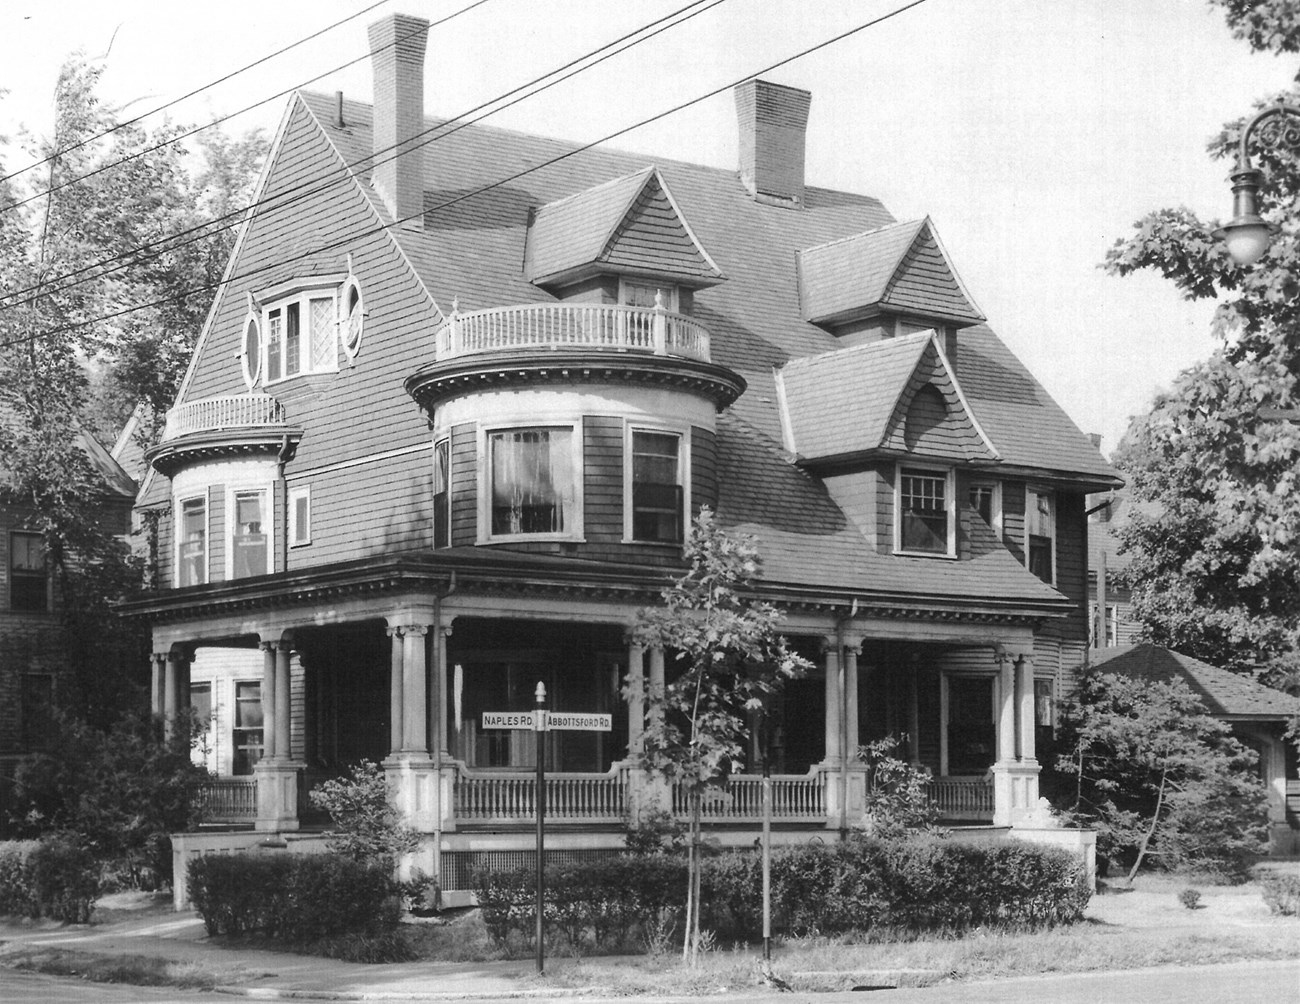 A black and white photo of a three story Victorian house with three gables, a bay window and rounded corner window with balconies, and a wraparound porch on a street corner.